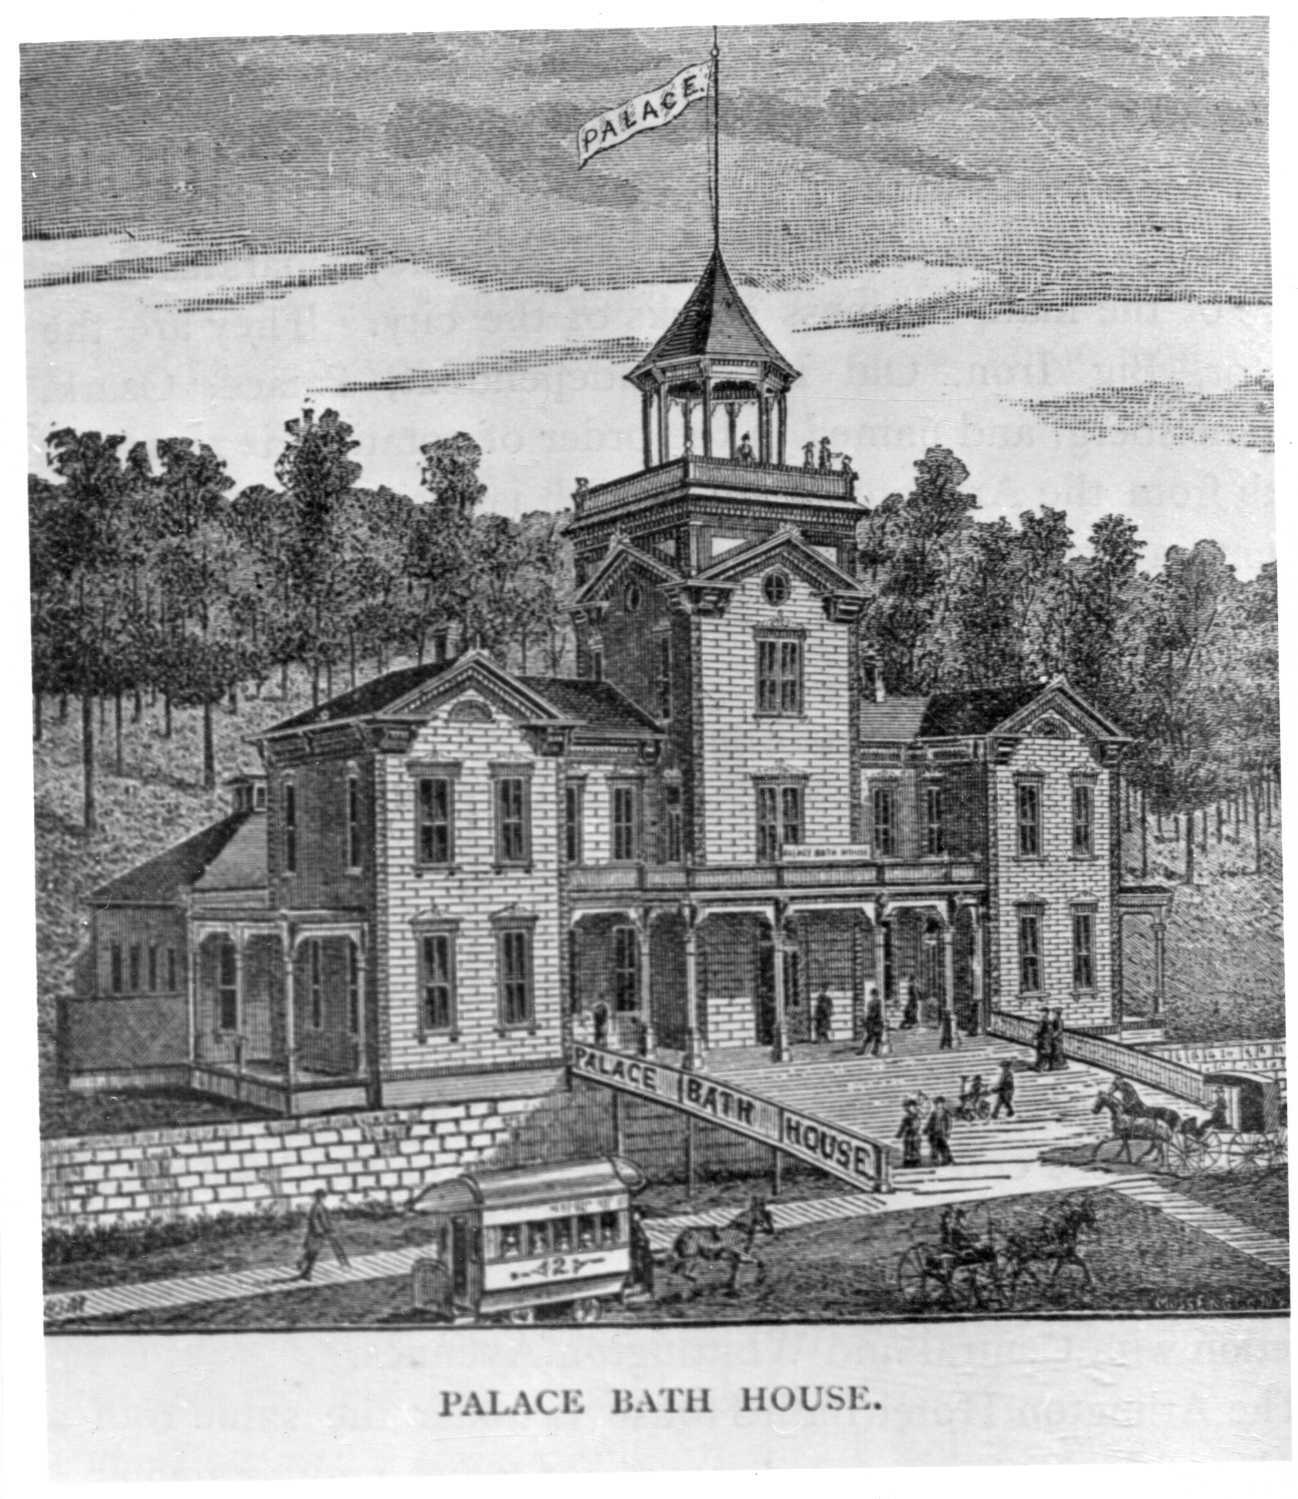 Black & white print; drawing or engraving
Palace Bathhouse engraving or bookplate; shows bathhouse from front c. 1890s
Portrait orientation, white border (wider at bottom)
On back, stamped name, "Mary D. Hudgins"; handwritten address "Mary D. Hudgins/1030 Park/Hot Sporings, Ark."